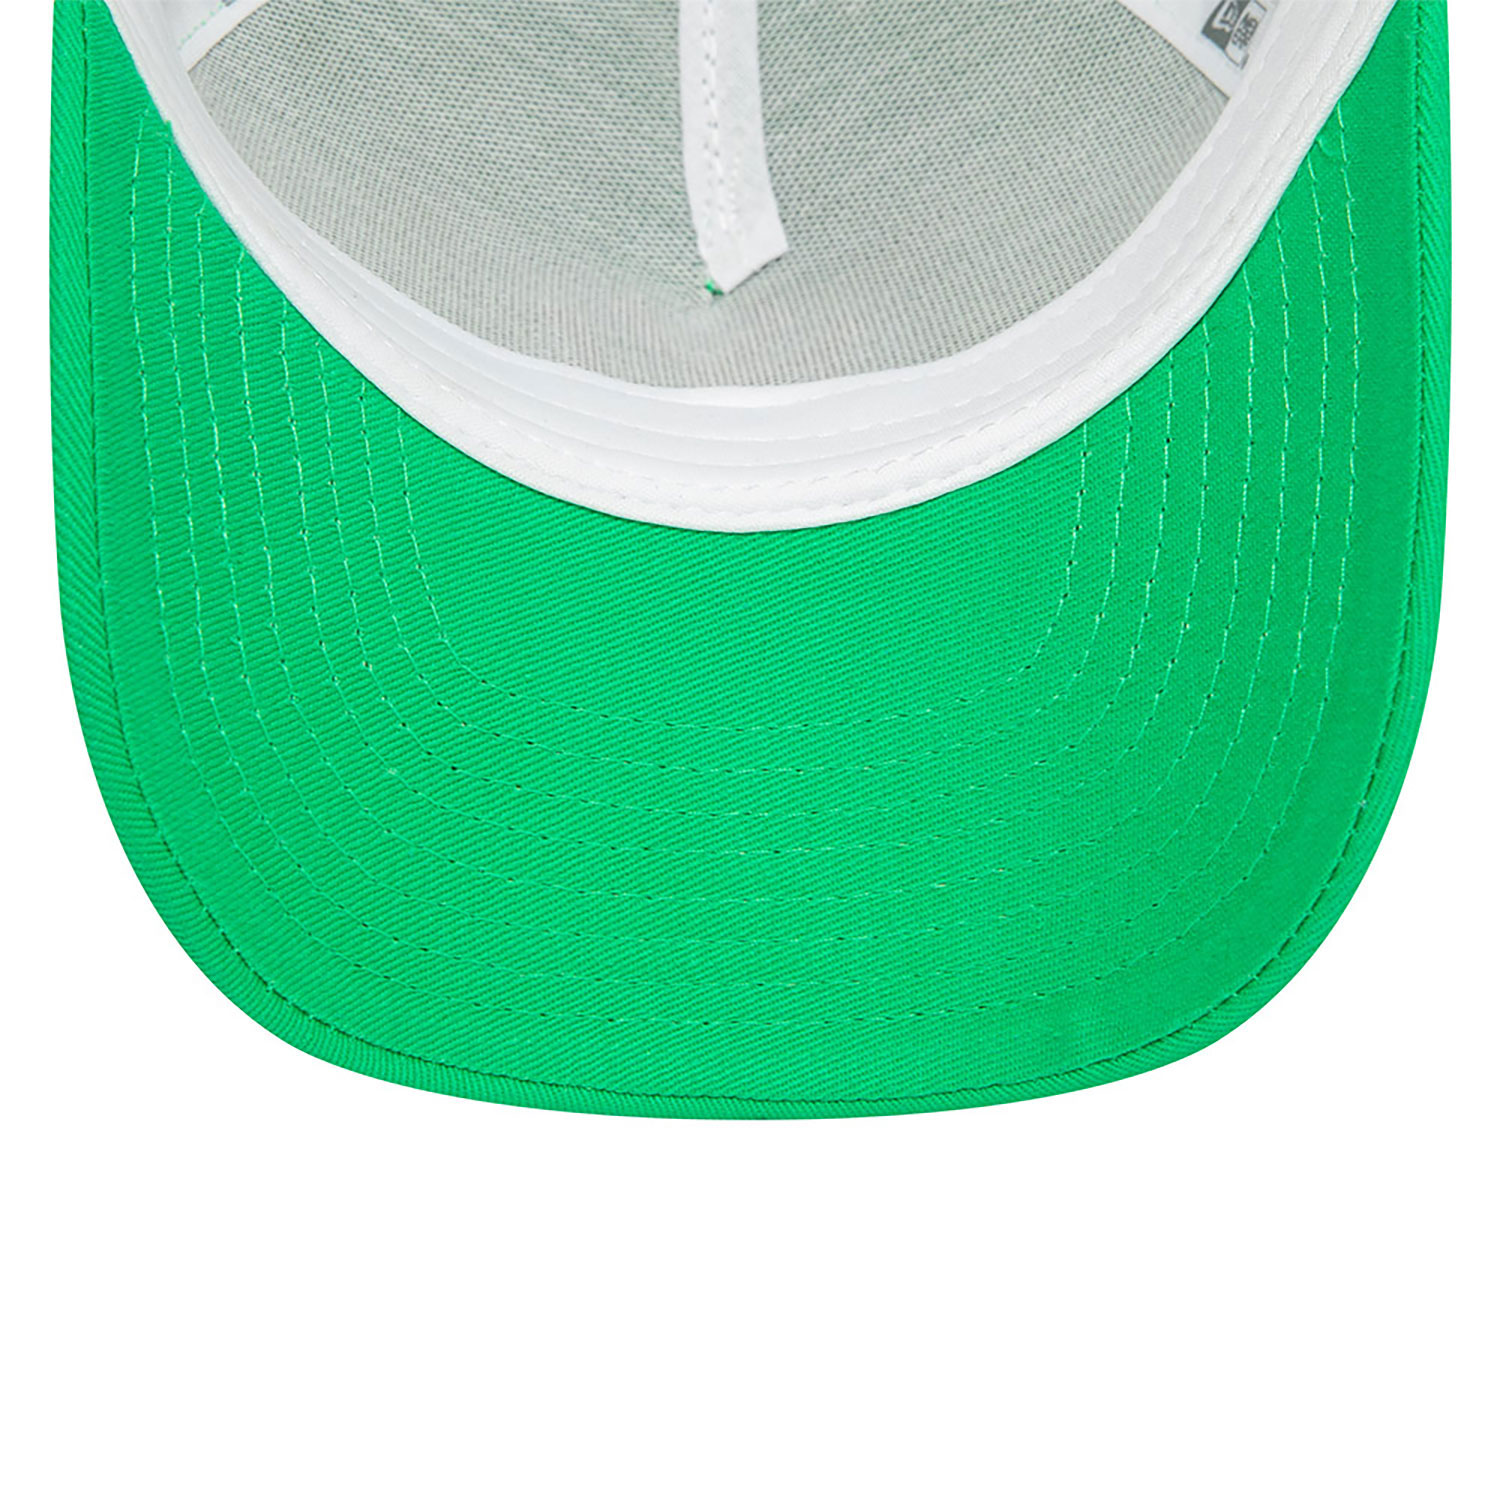 New York Yankees Youth League Essential Bright Green A-Frame Trucker Cap